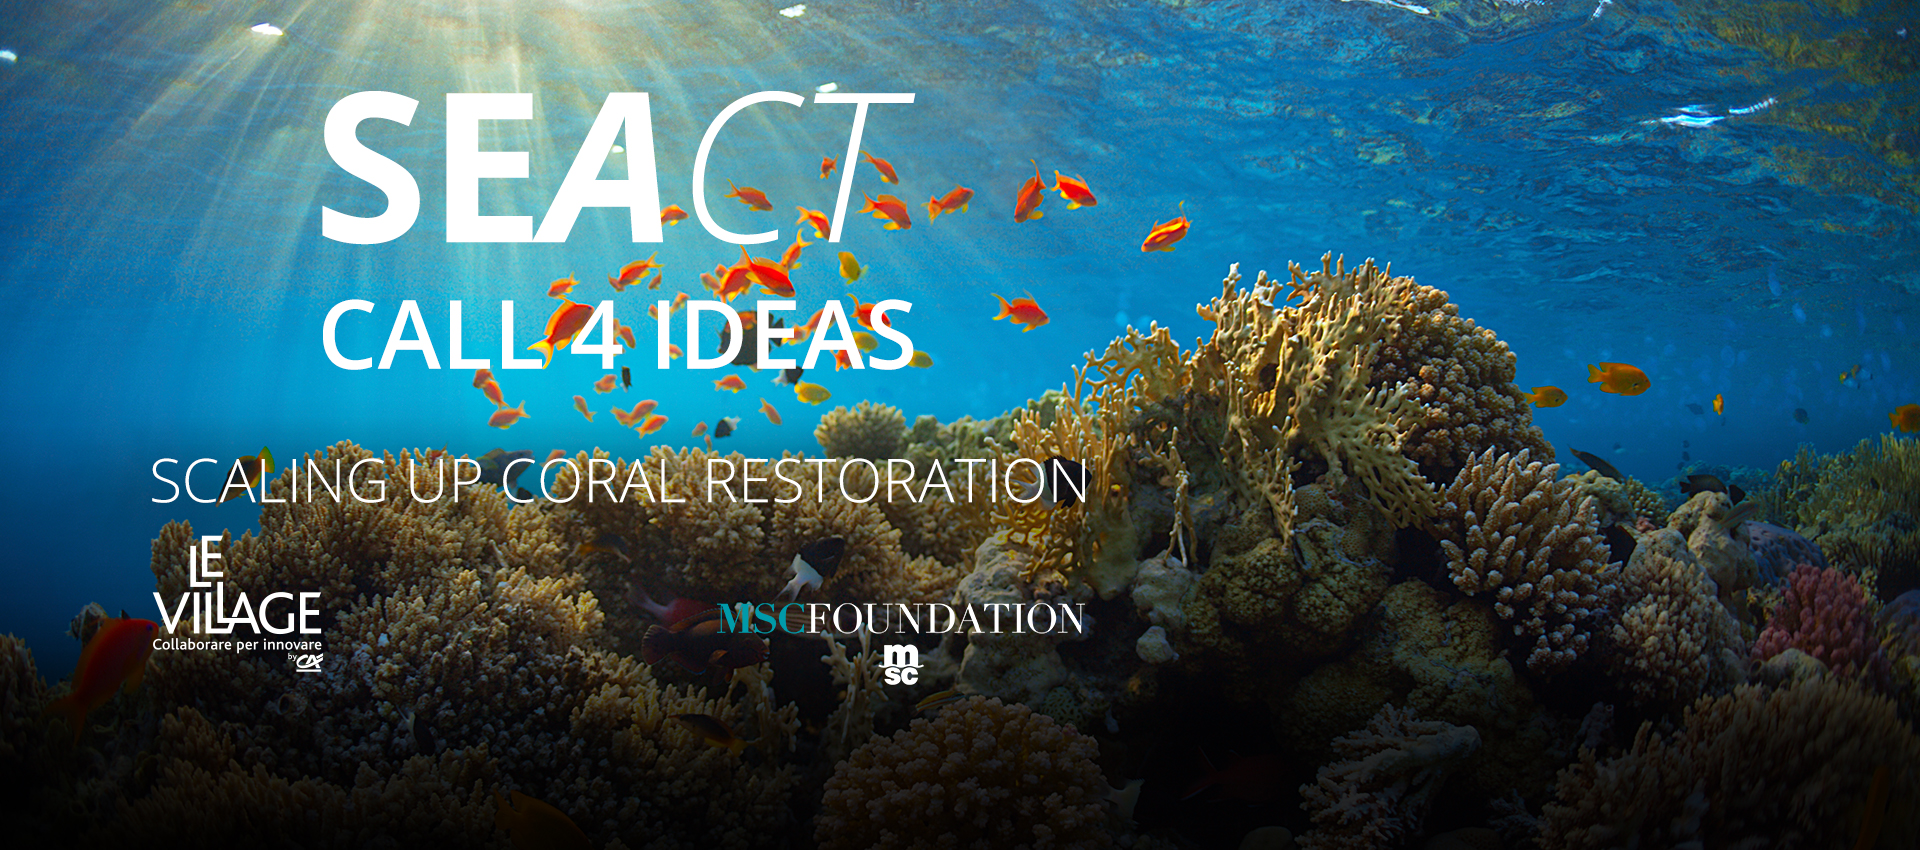 Attracting innovation talent to power the scaling up of coral restoration | MSC Foundation